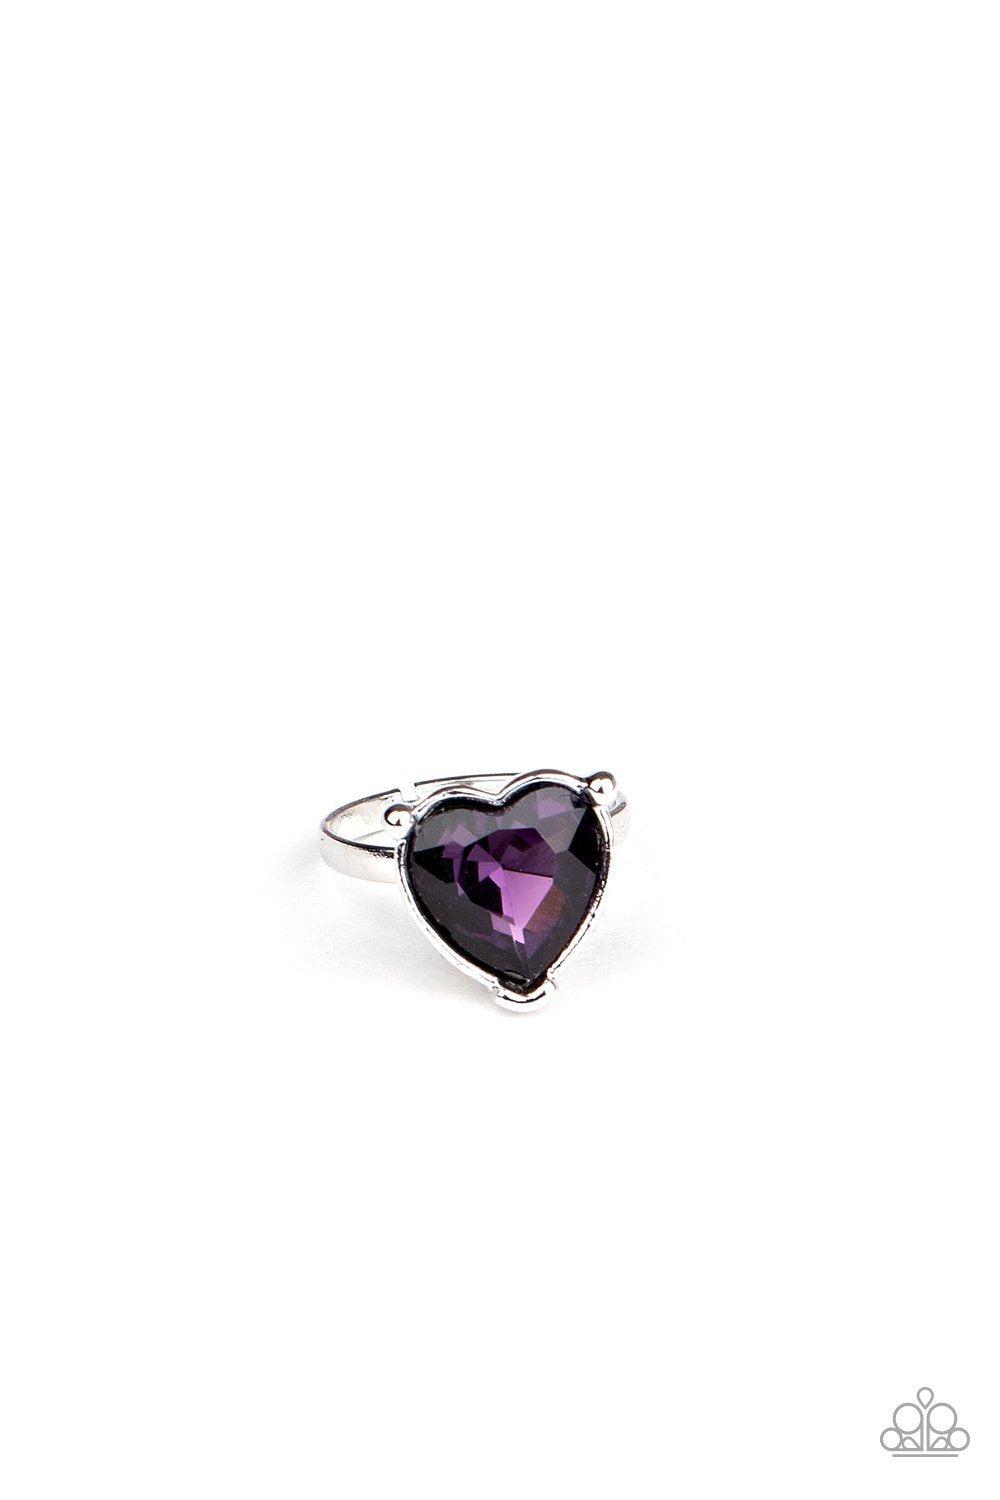 Starlet Shimmer Children&#39;s Gem Heart Rings - Paparazzi Accessories (set of 5)-CarasShop.com - $5 Jewelry by Cara Jewels